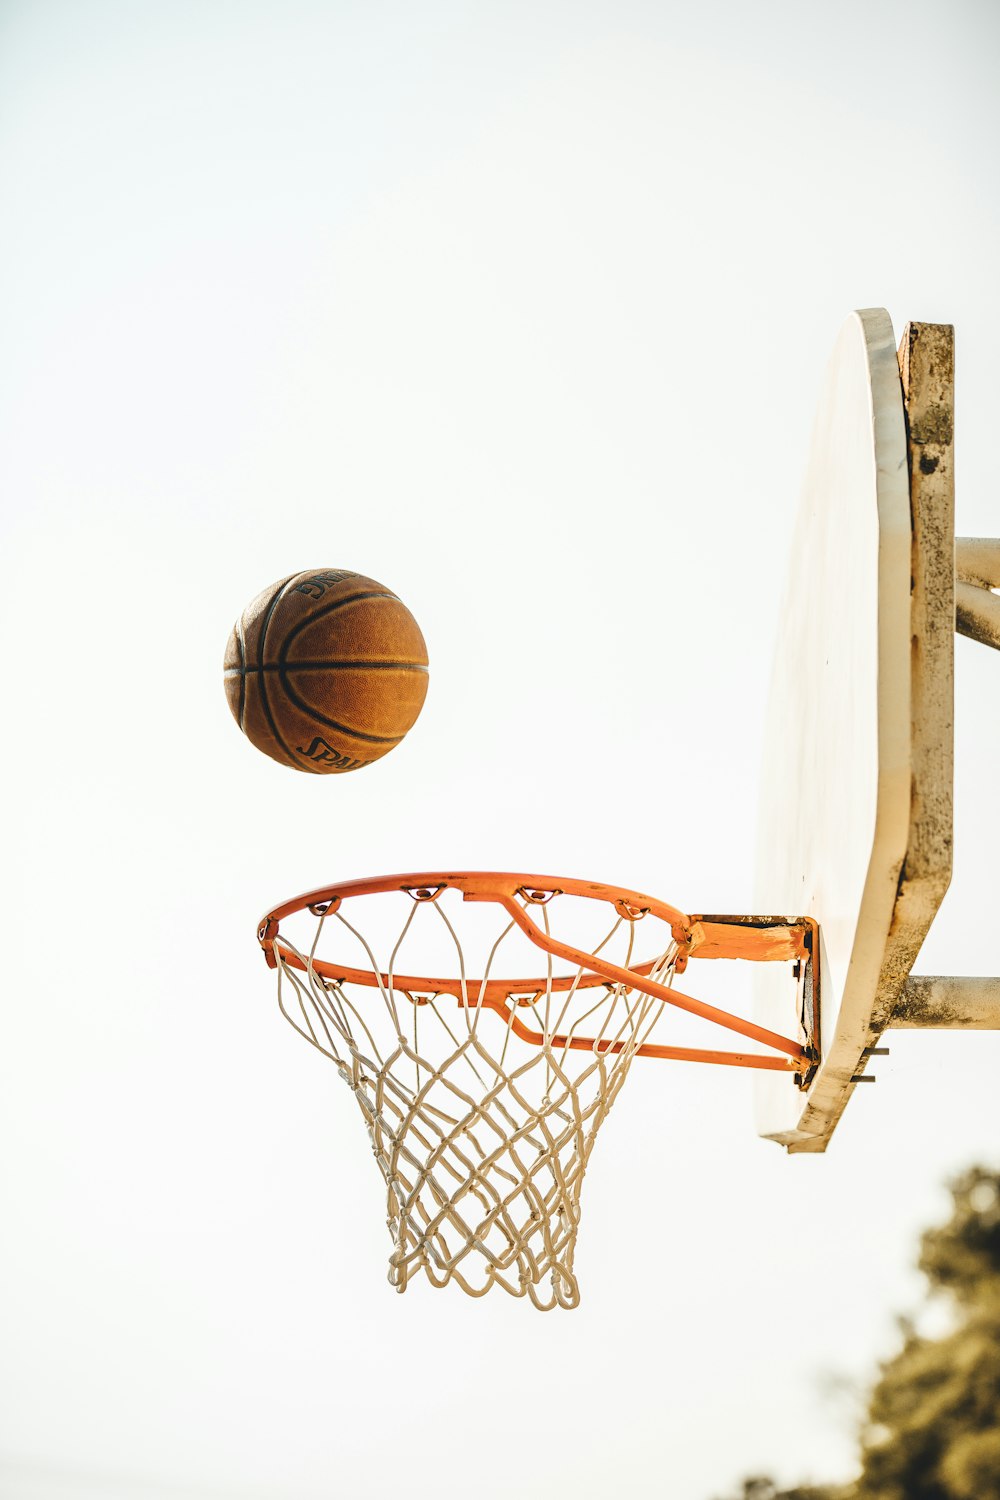 basketball on basketball hoop with white background